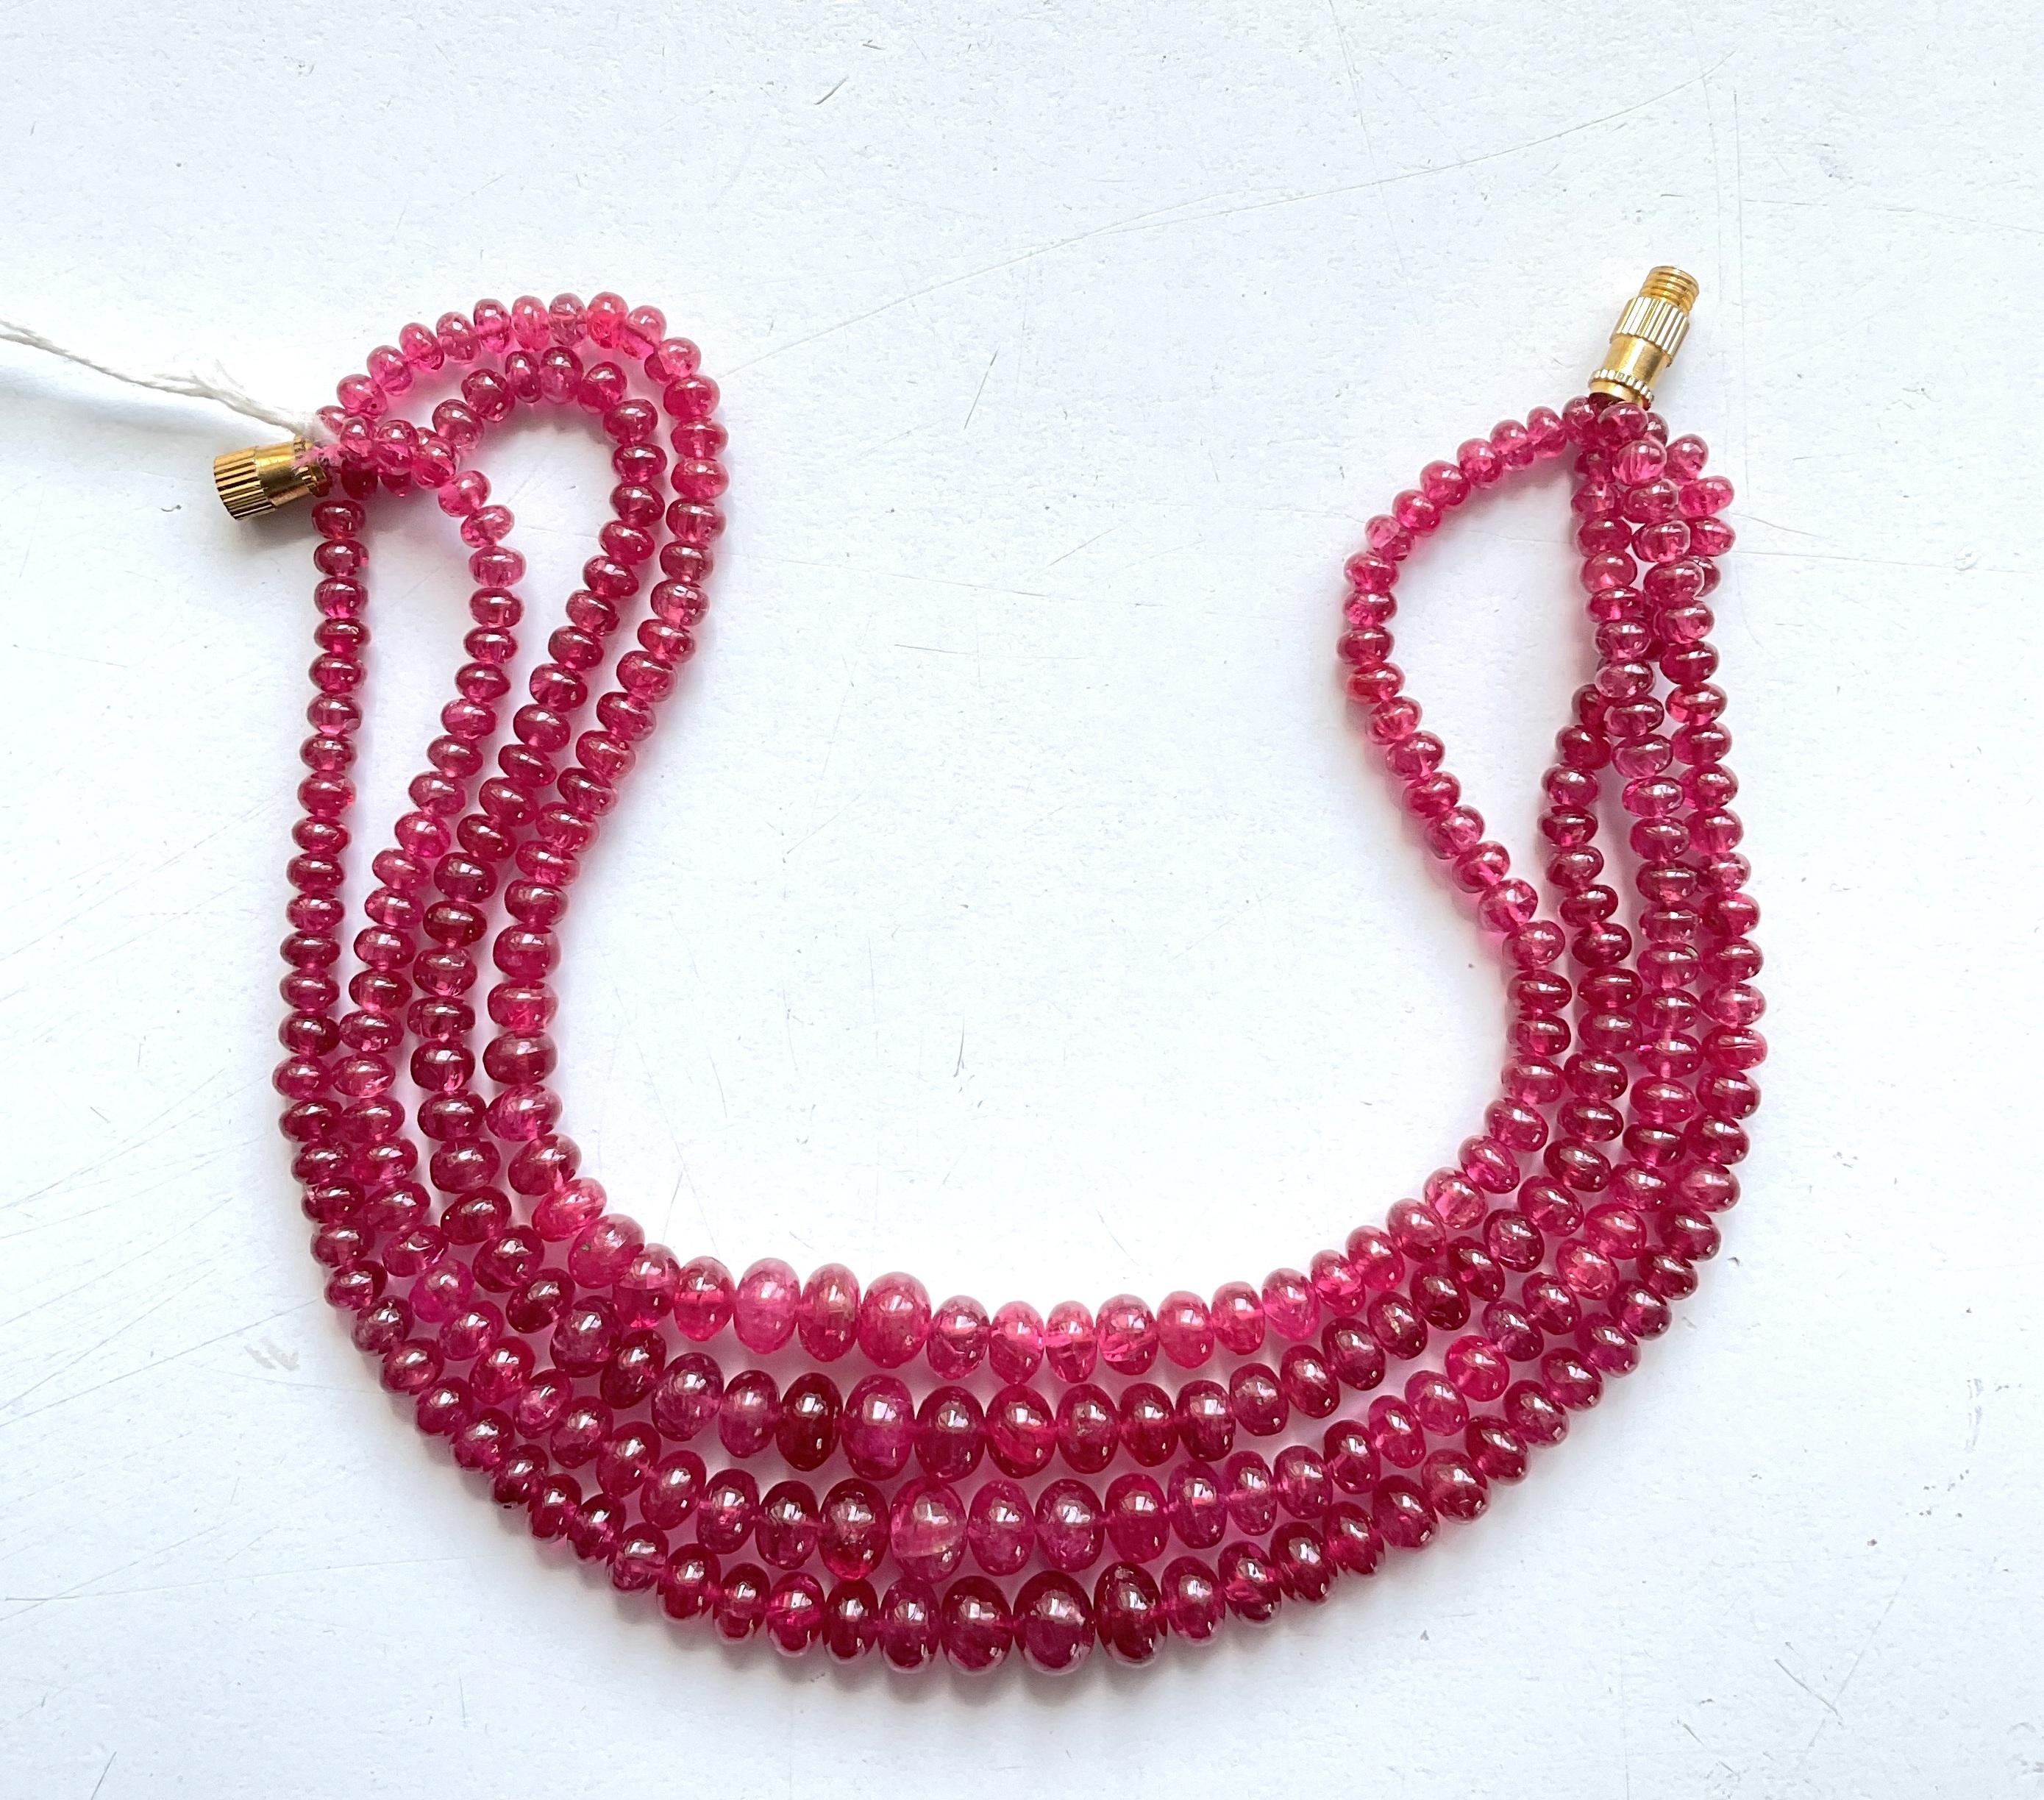 165.75 Carats Burma Red Spinel Beads Top Quality Beaded Necklace Natural Gem For Sale 2